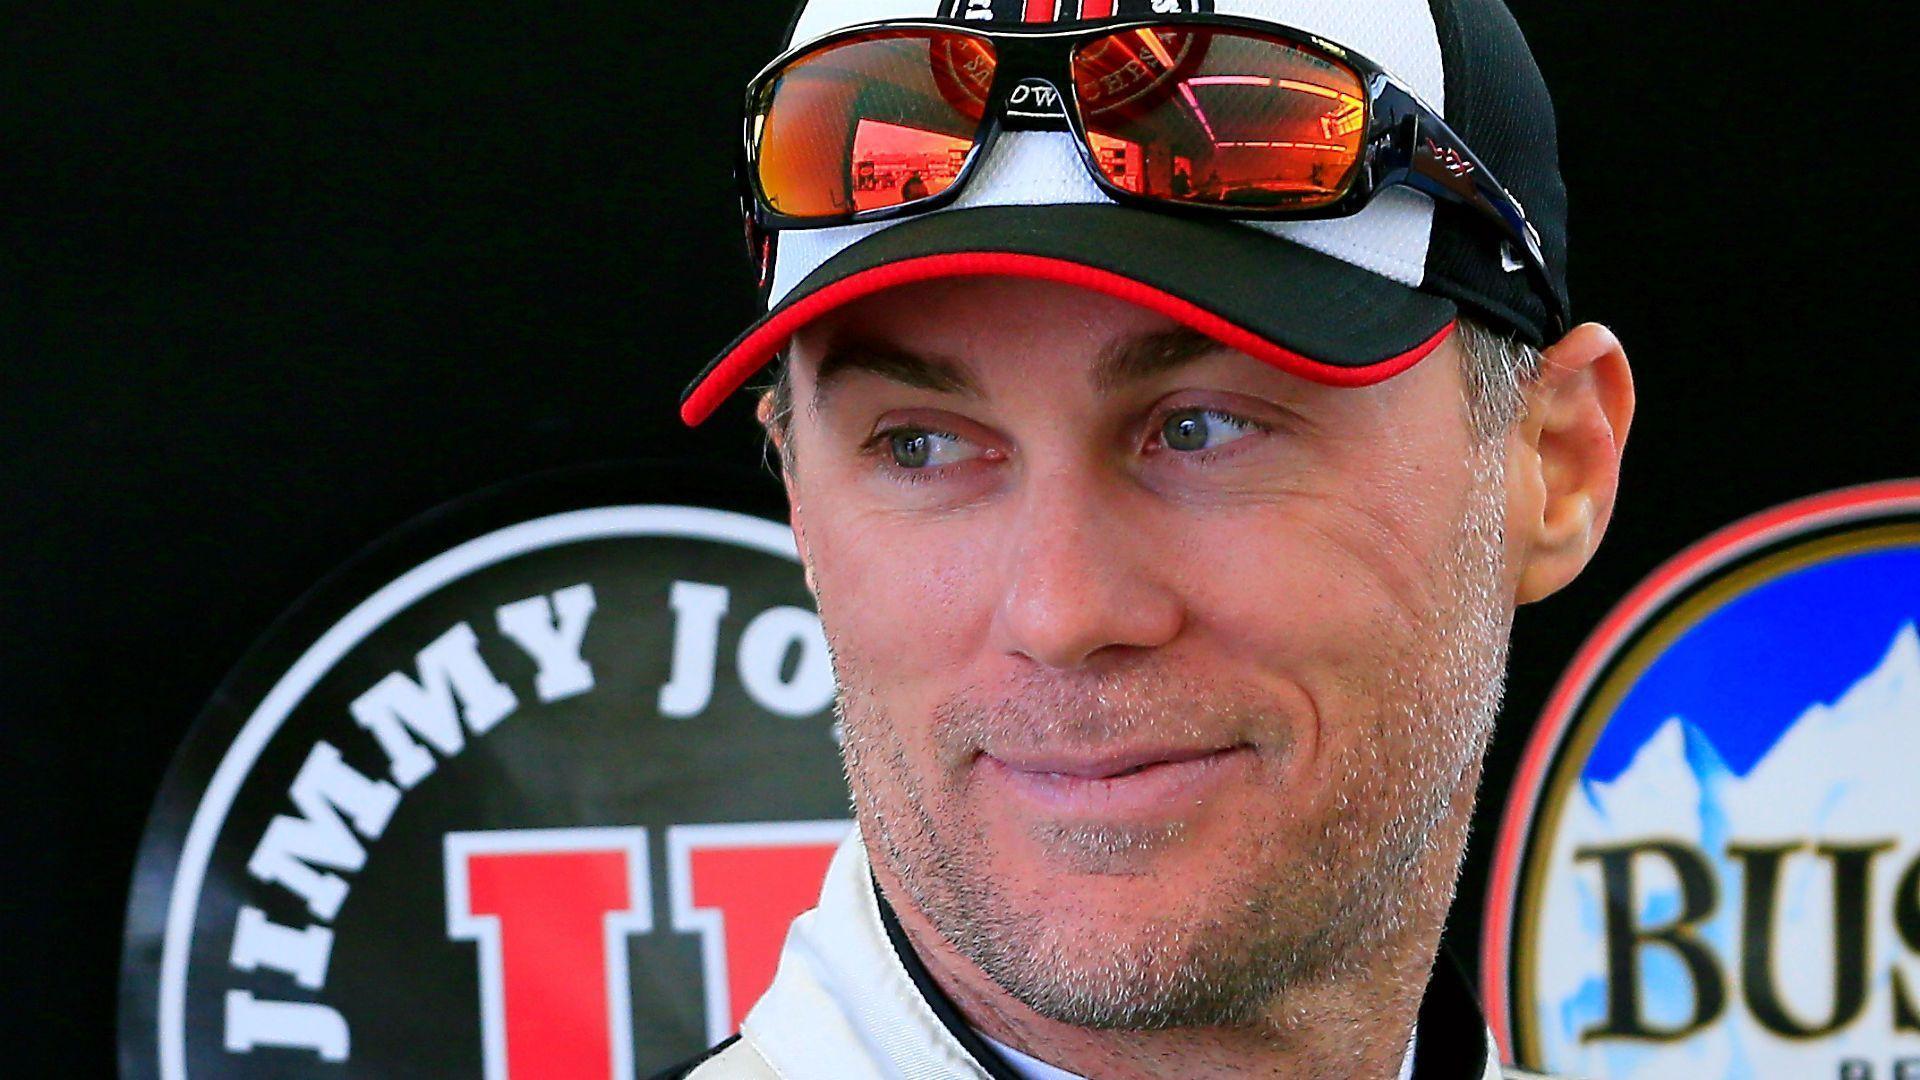 Kevin Harvick ends speculation on future, extends pact